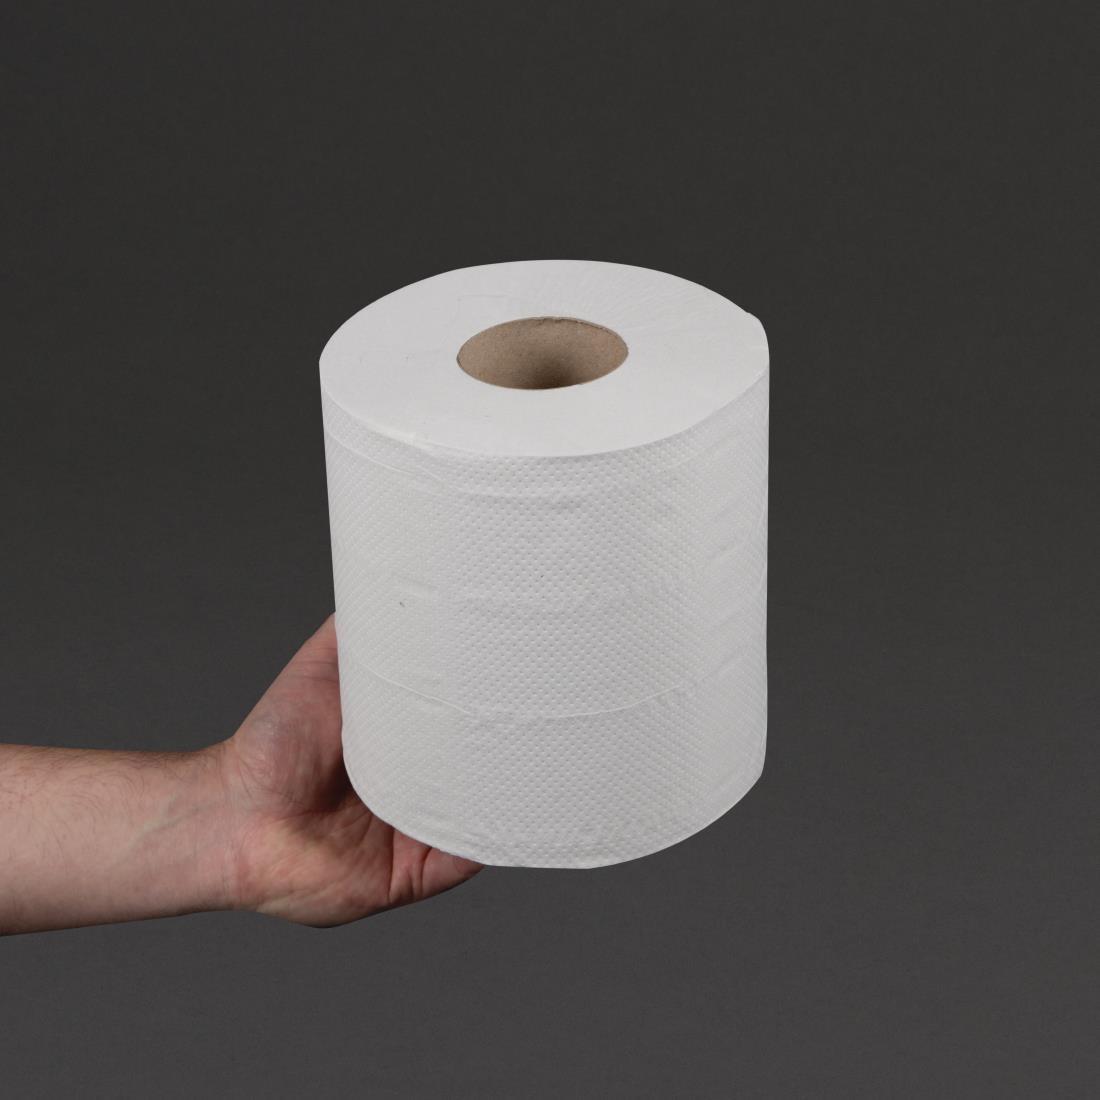 Jantex Centrefeed White Rolls 2-Ply 120m (Pack of 6) - DL920  - 2